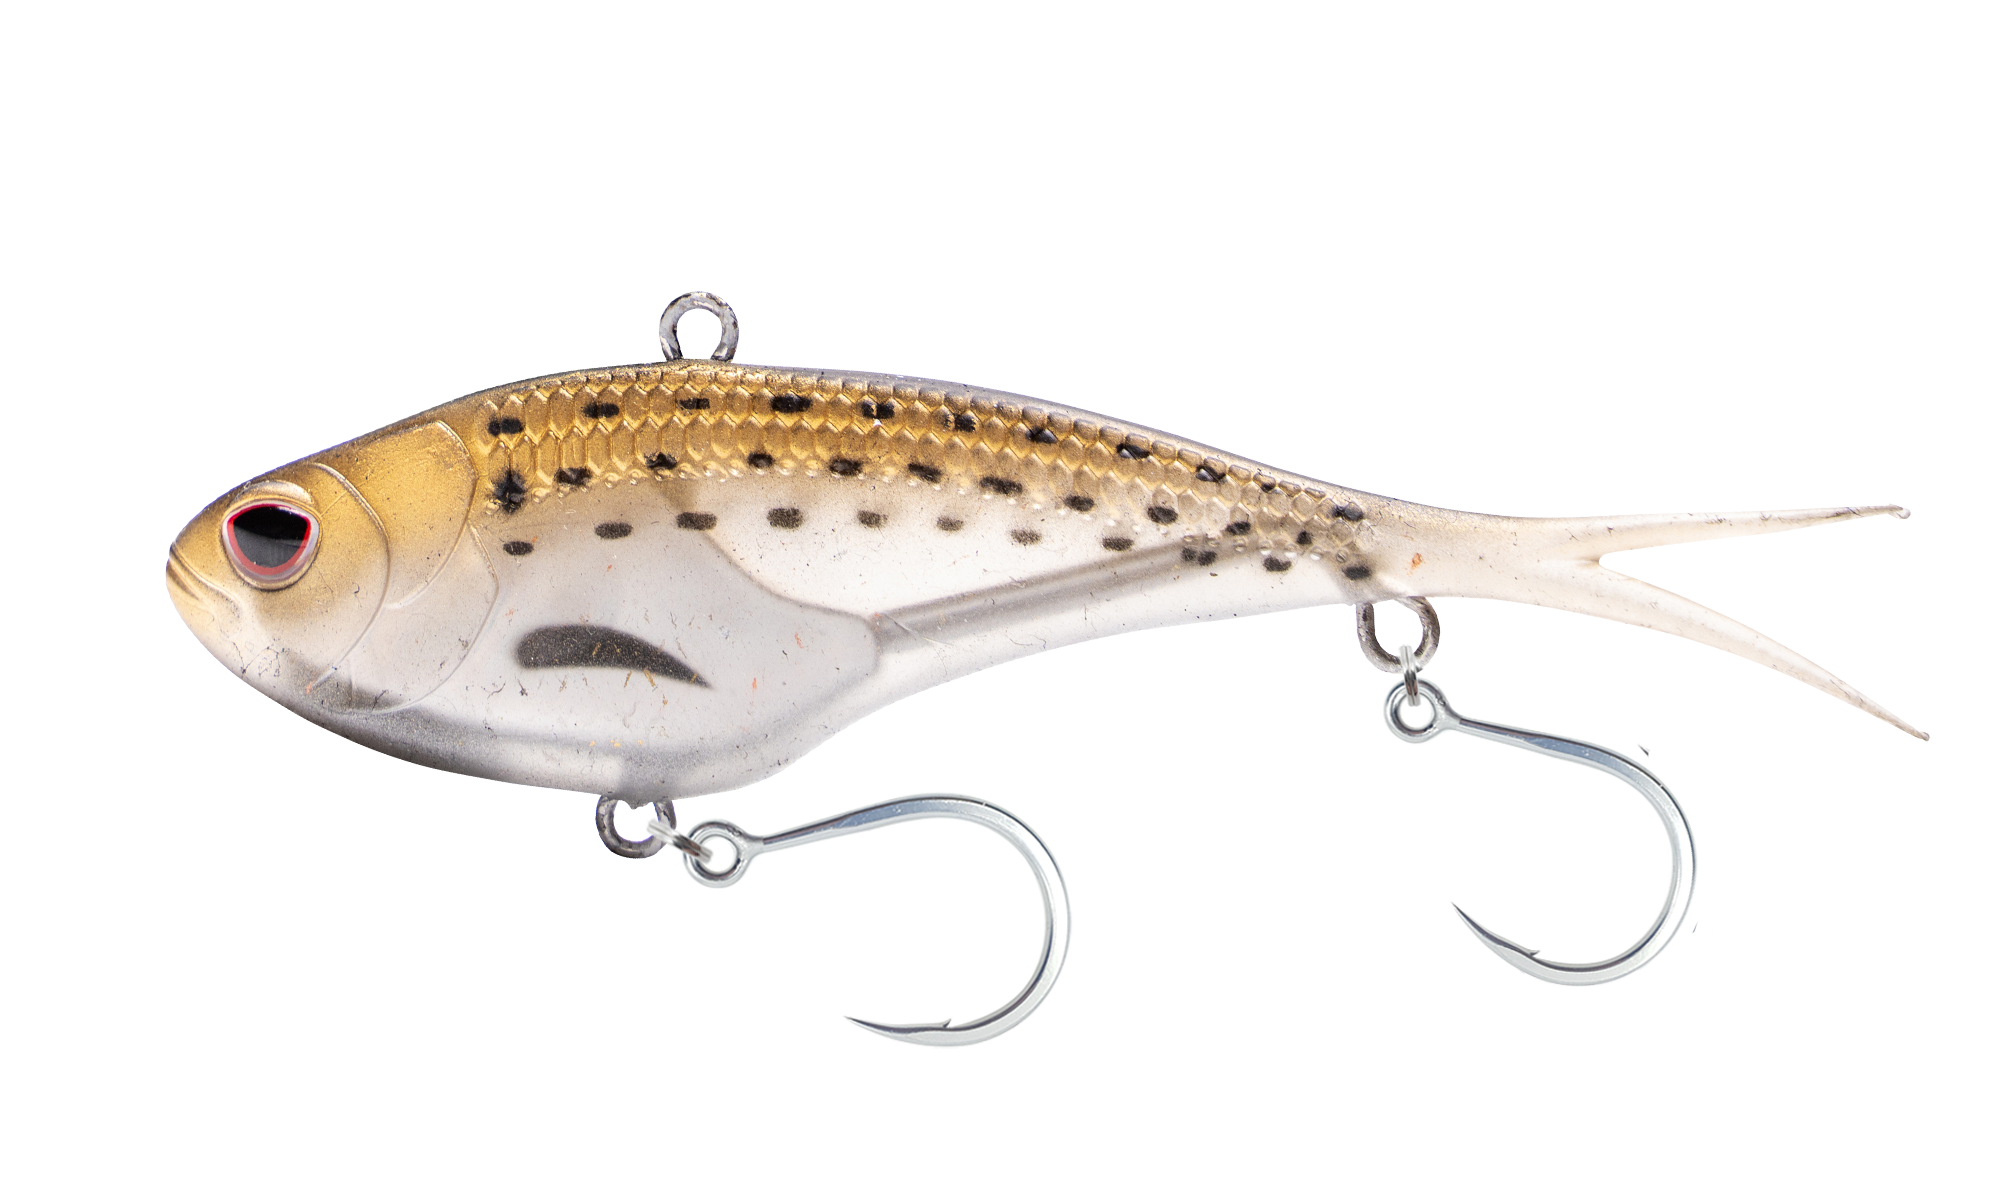 Nomad Design - Vertrex Max Offshore Vibe Lures